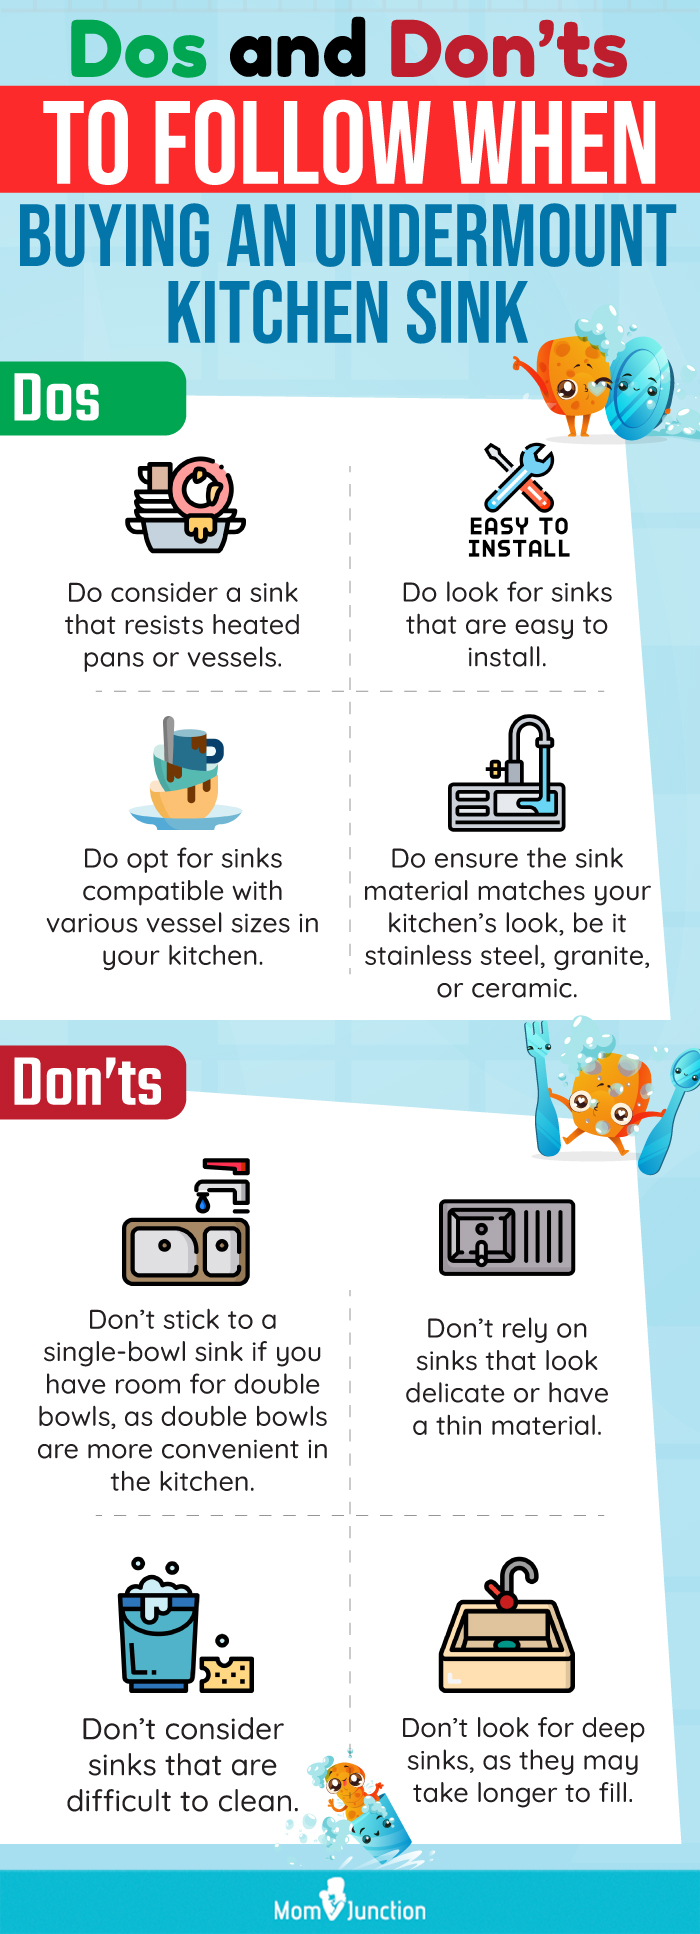 Dos And Don’ts To Follow When Buying An Undermount Kitchen Sink (infographic)